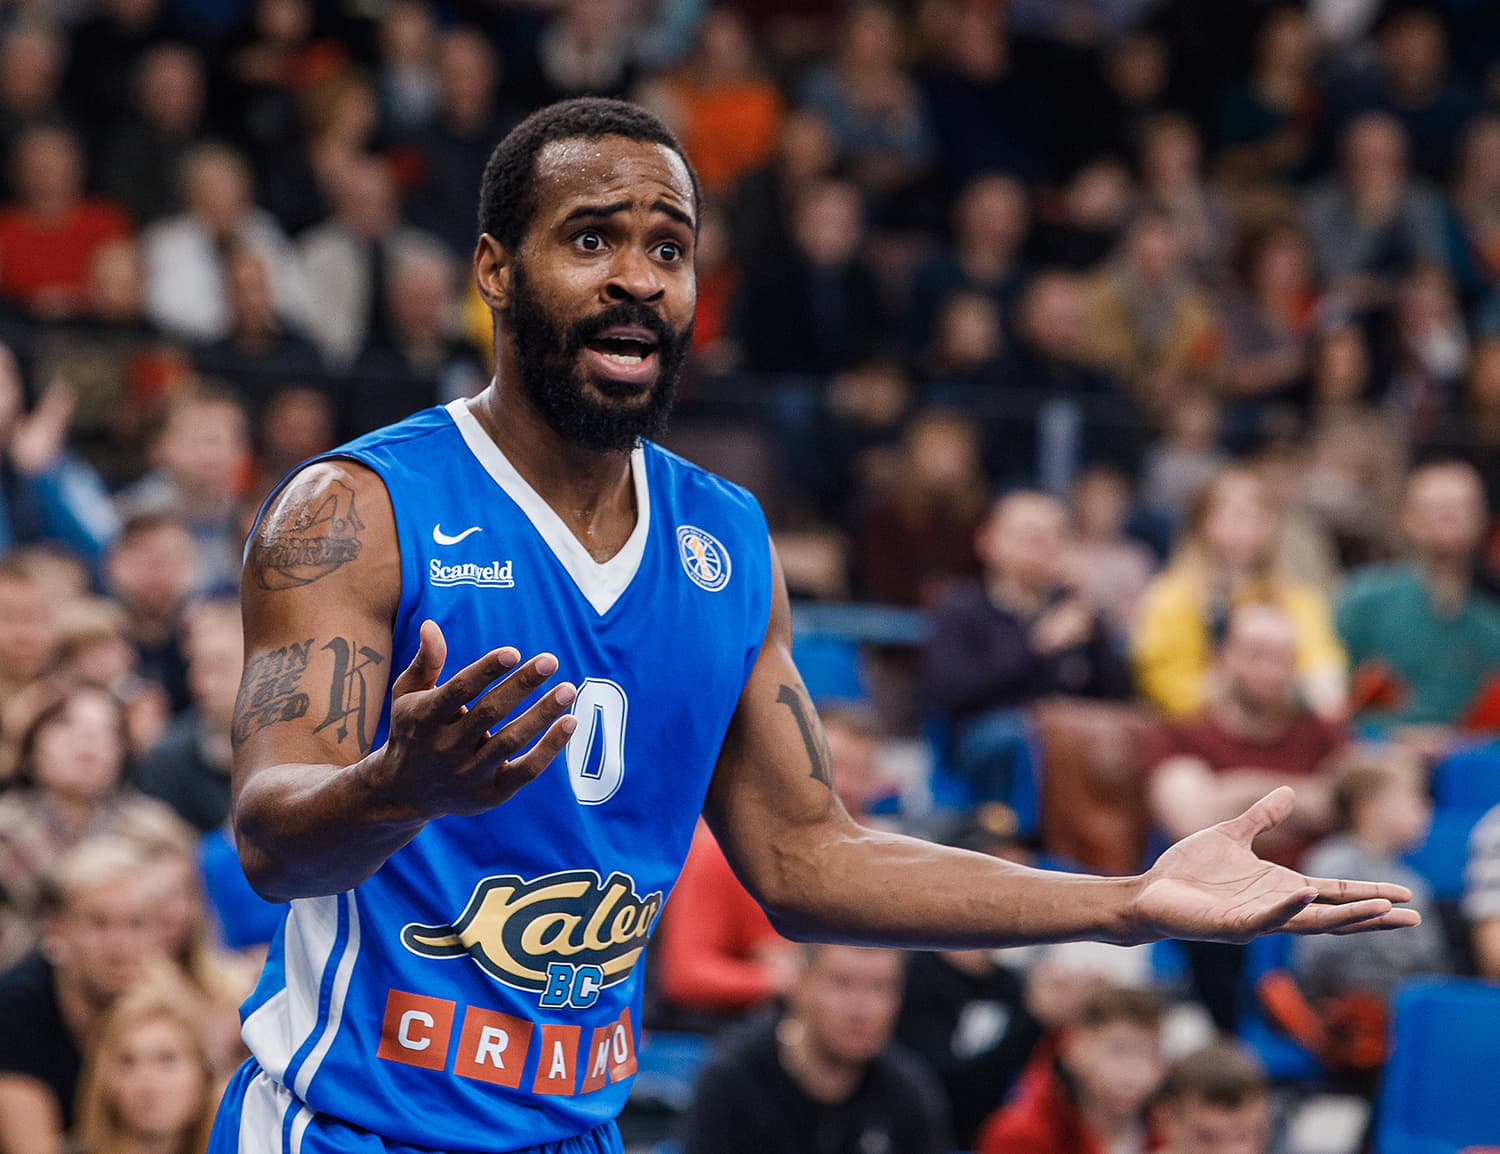 Loko and Zenit continue to fight online, PARMA get its first win, McCollum puts up a show in Minsk, Week 5 in review